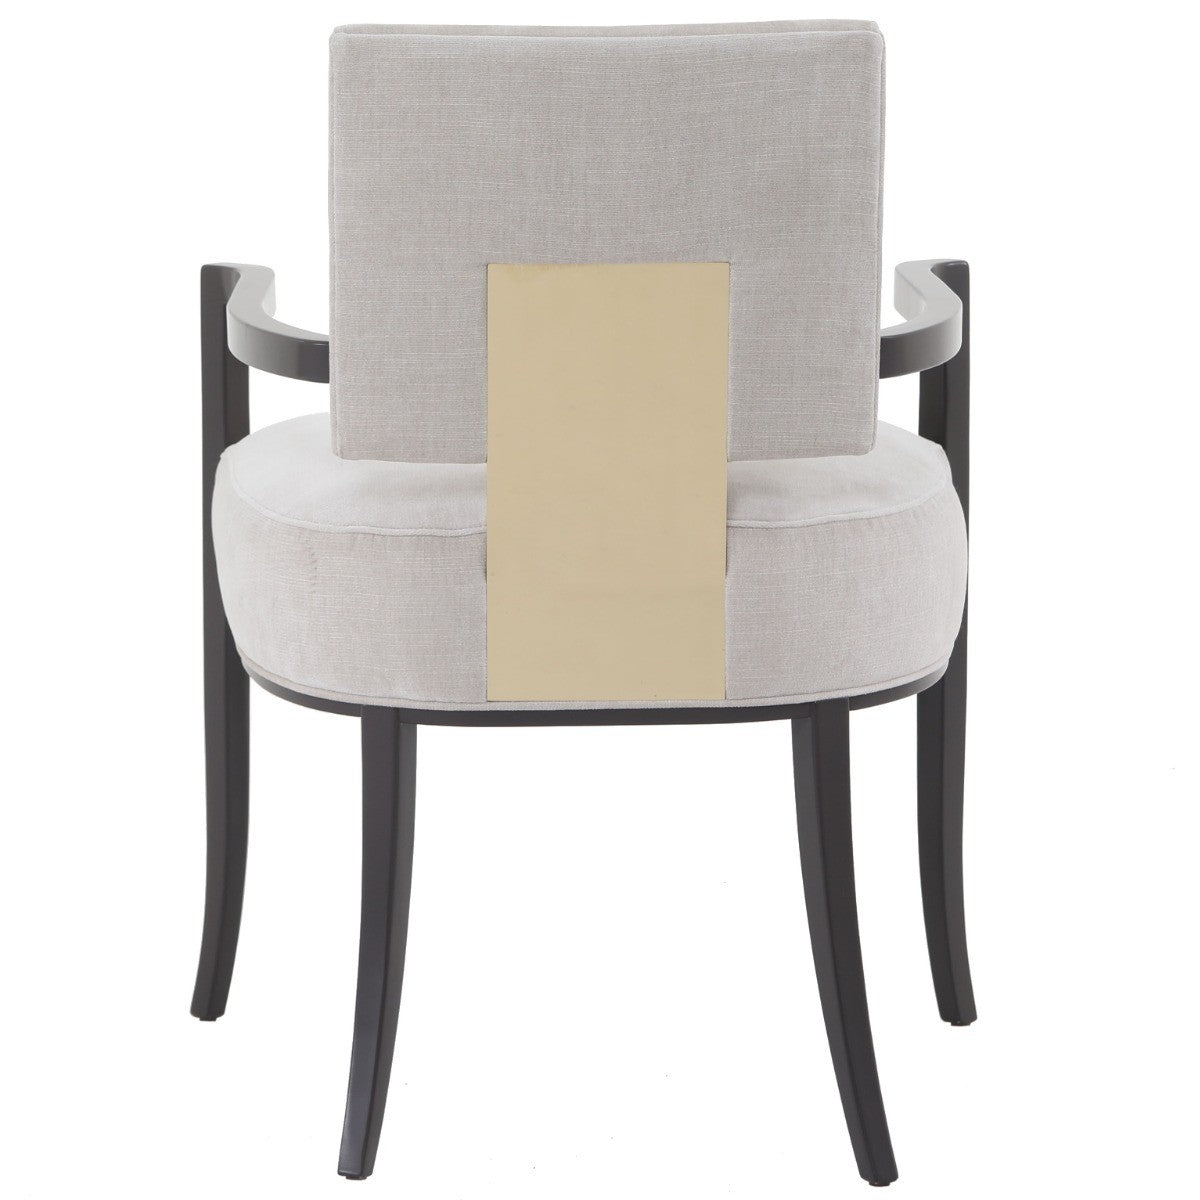 Caracole Classic Reserved Seating Dining Chair with Arm